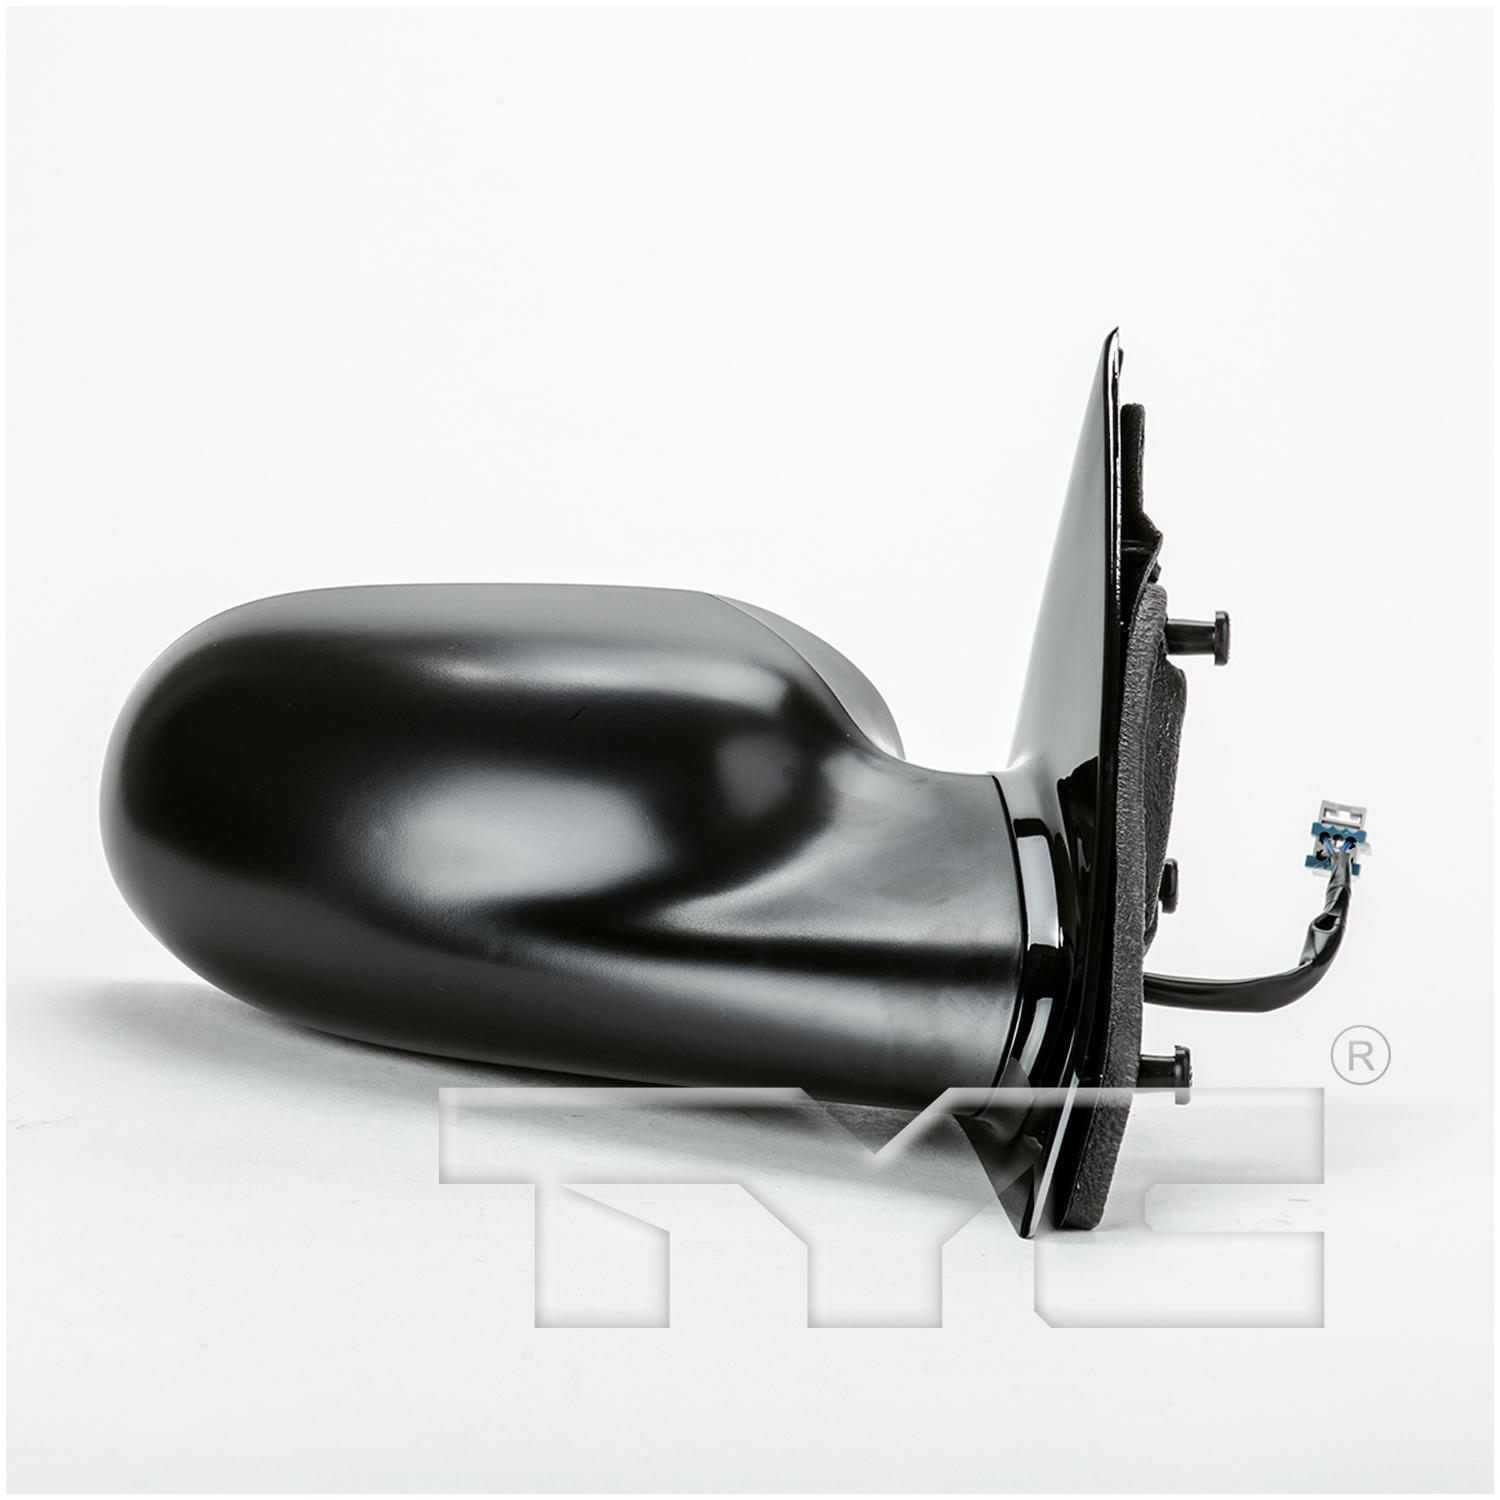 Aftermarket MIRRORS for SATURN - LS2, LS2,00-00,RT Mirror outside rear view